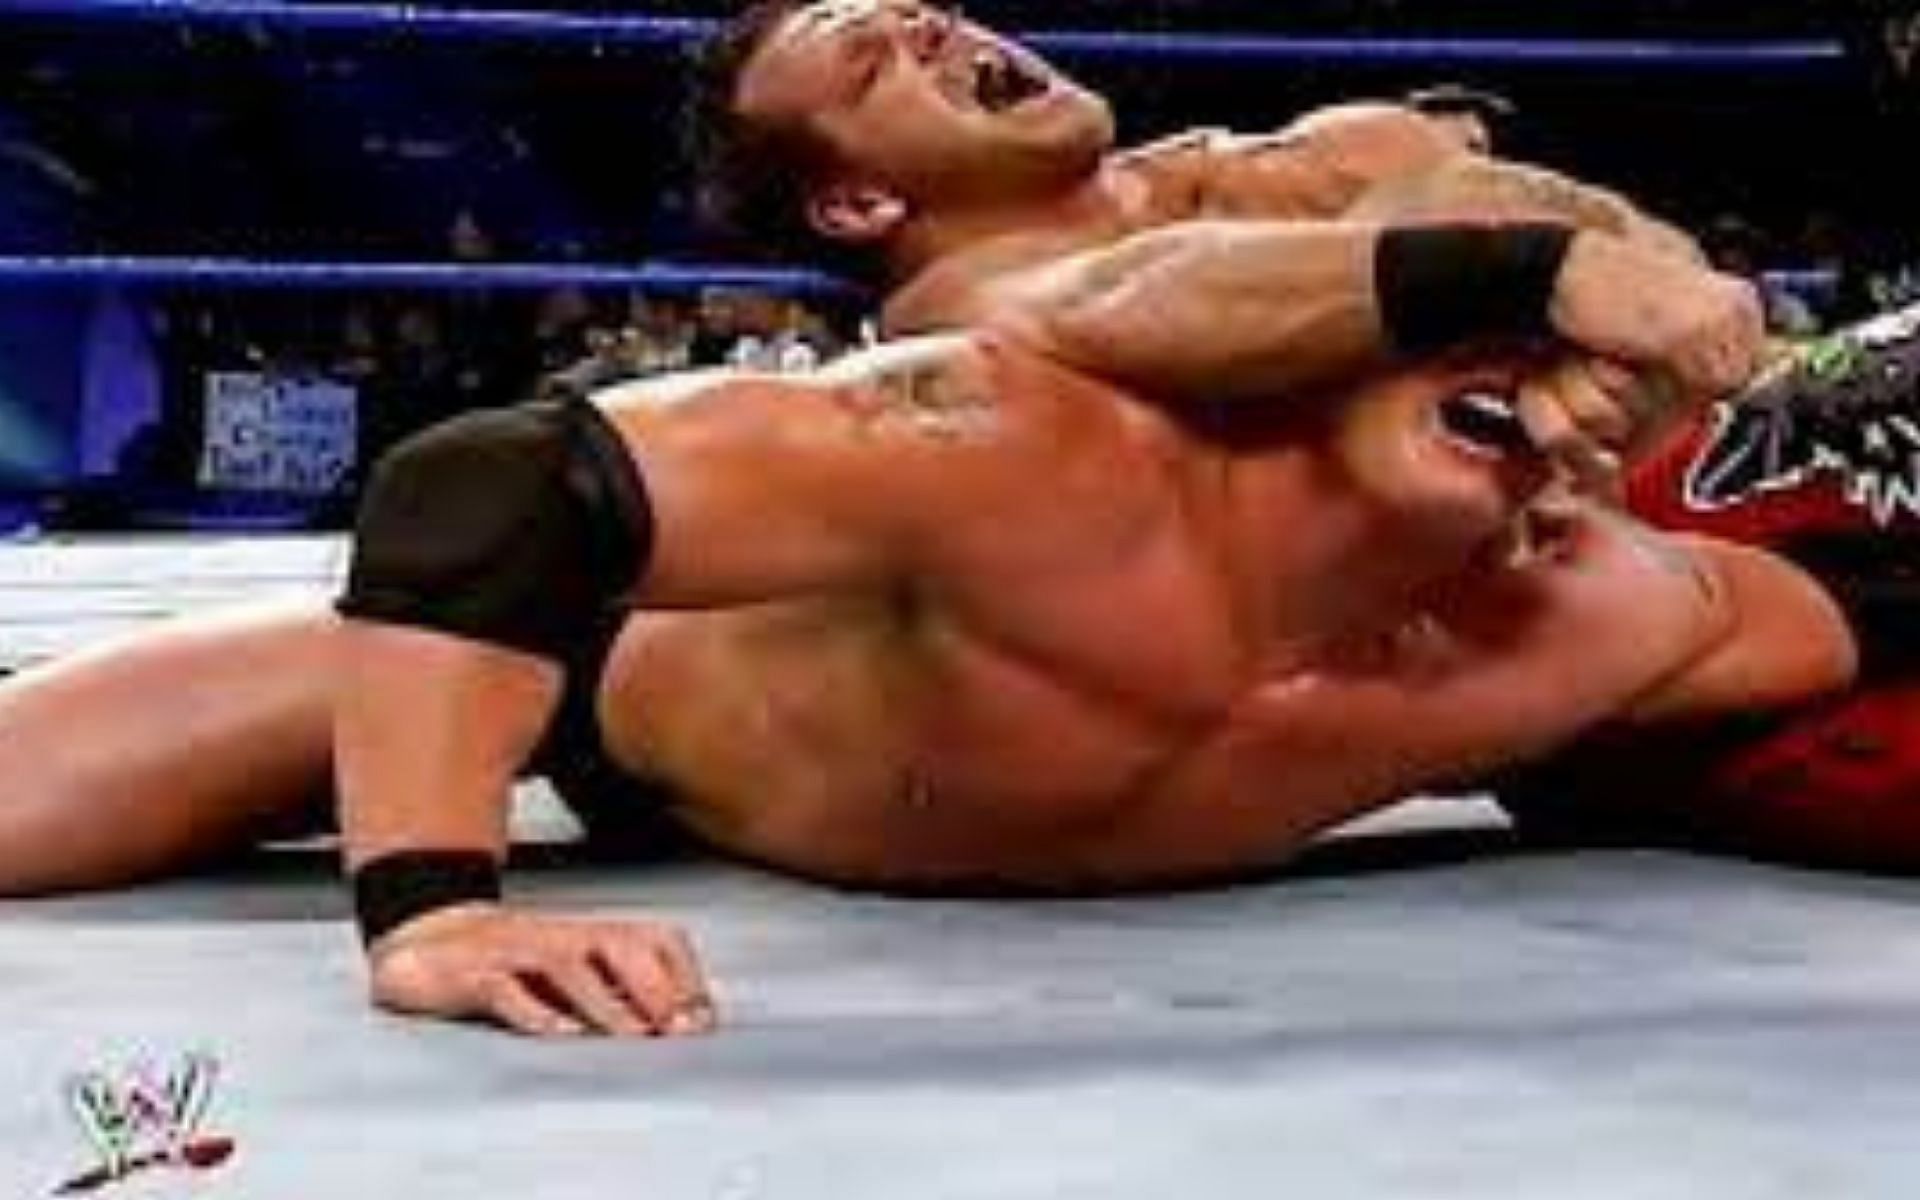 Chris Benoit almost won by submission